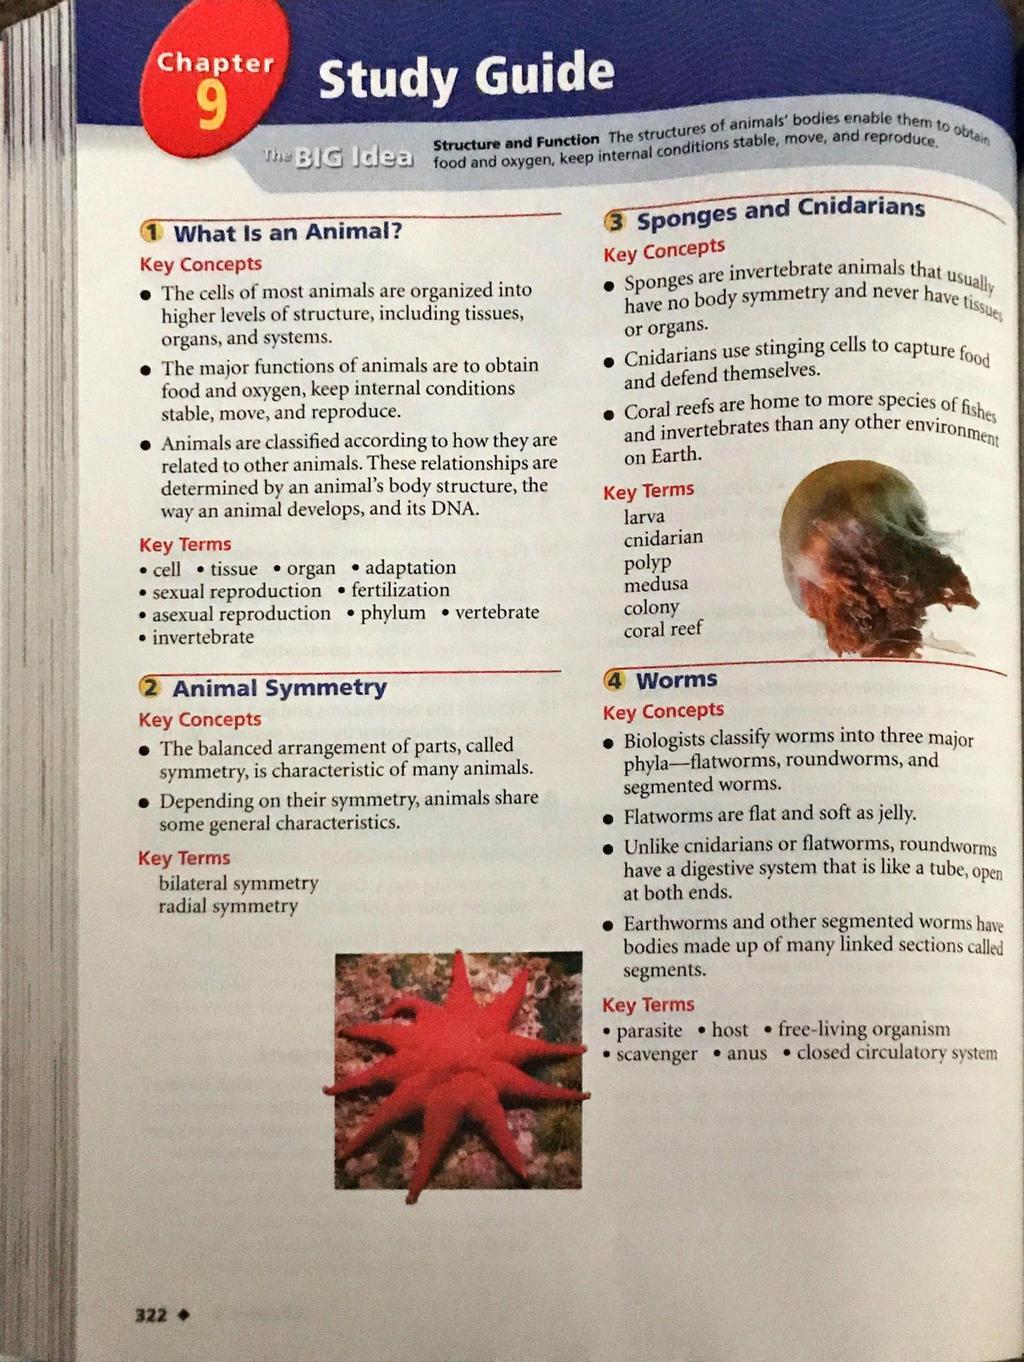 Chapter Study Guide JCJ3?.J 1, What Is an Animal? Key Concepts The cells of most animals are organized into higher levels of structure, including tissues, organs, and systems.